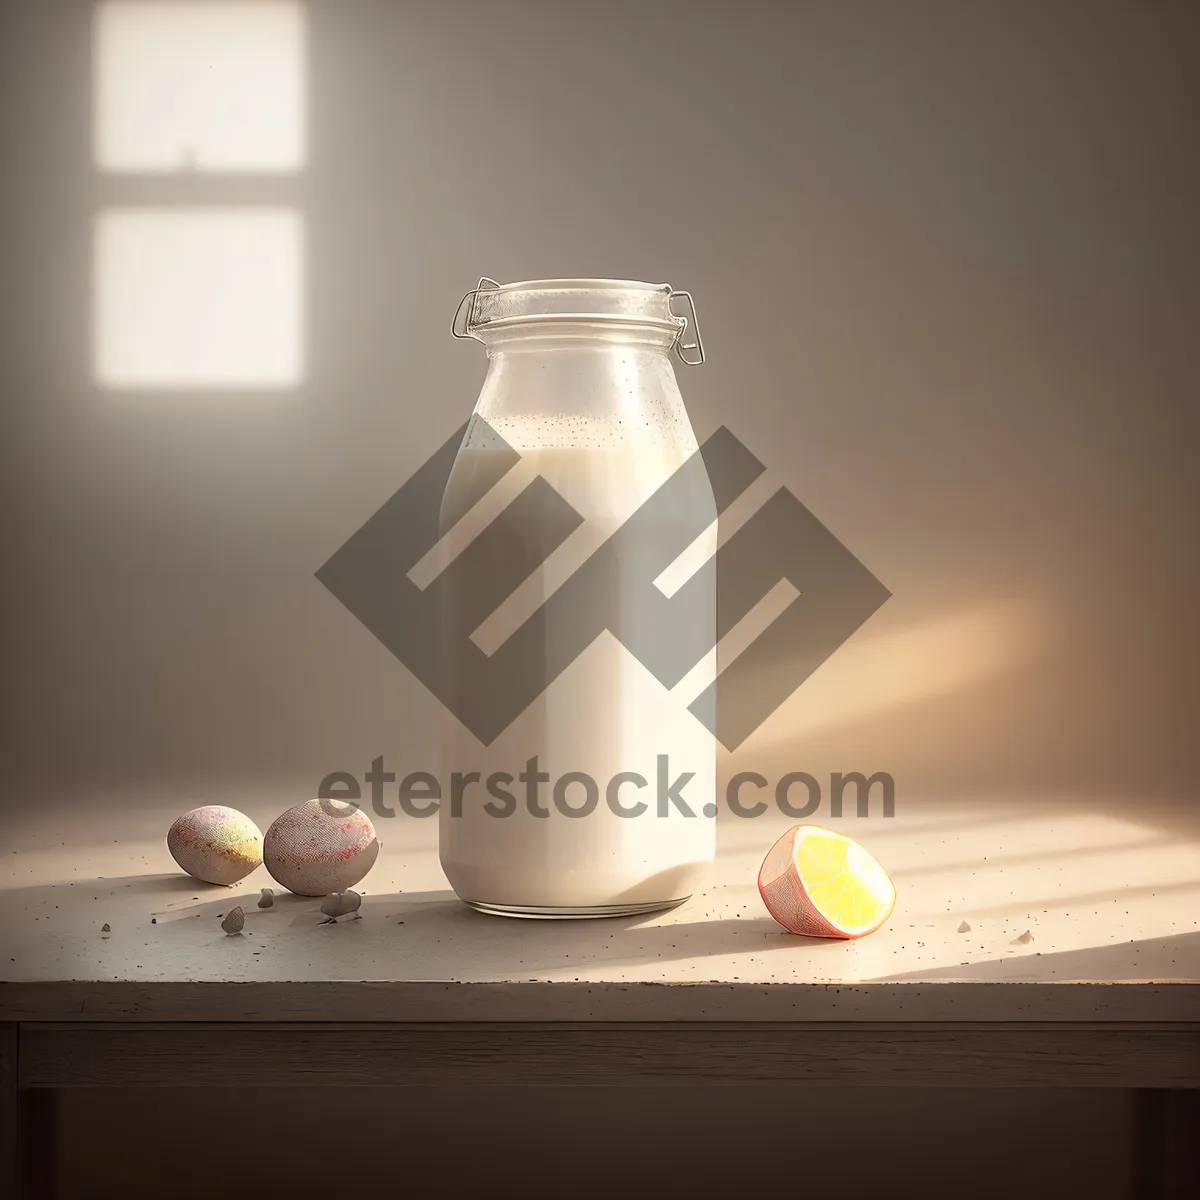 Picture of Fresh Milk in Glass Bottle, Healthy Dairy Beverage